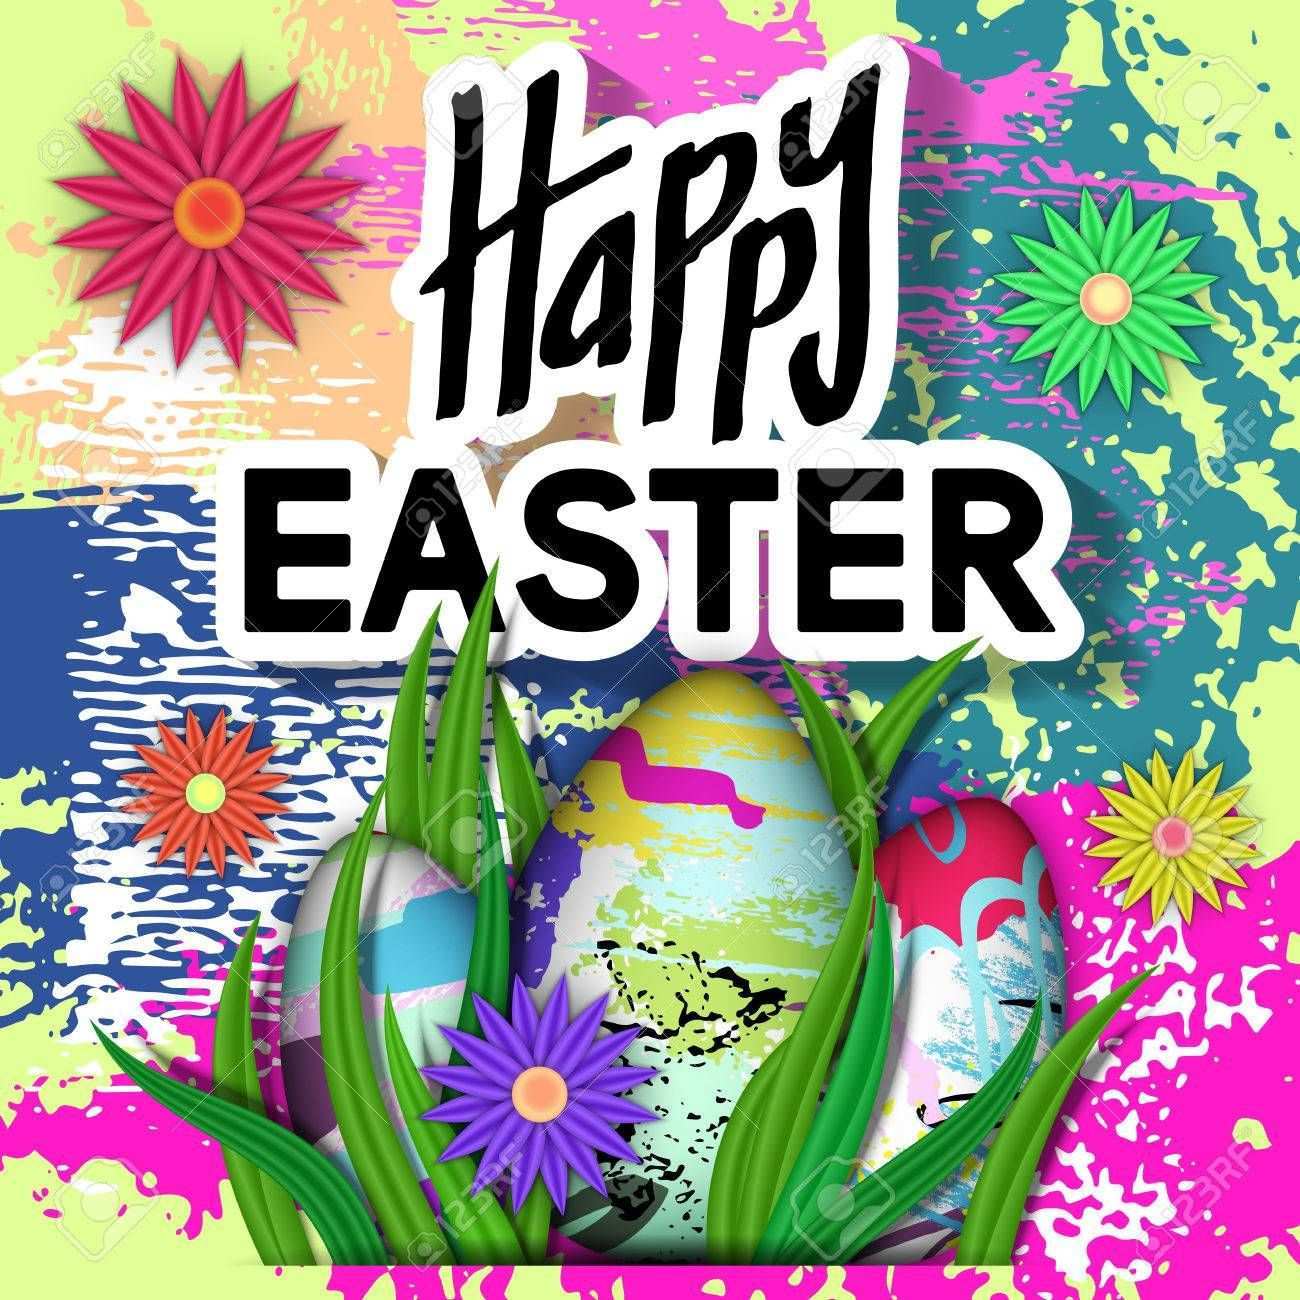 36 Creating Easter Card Designs Ks1 Download with Easter Card Designs Ks1